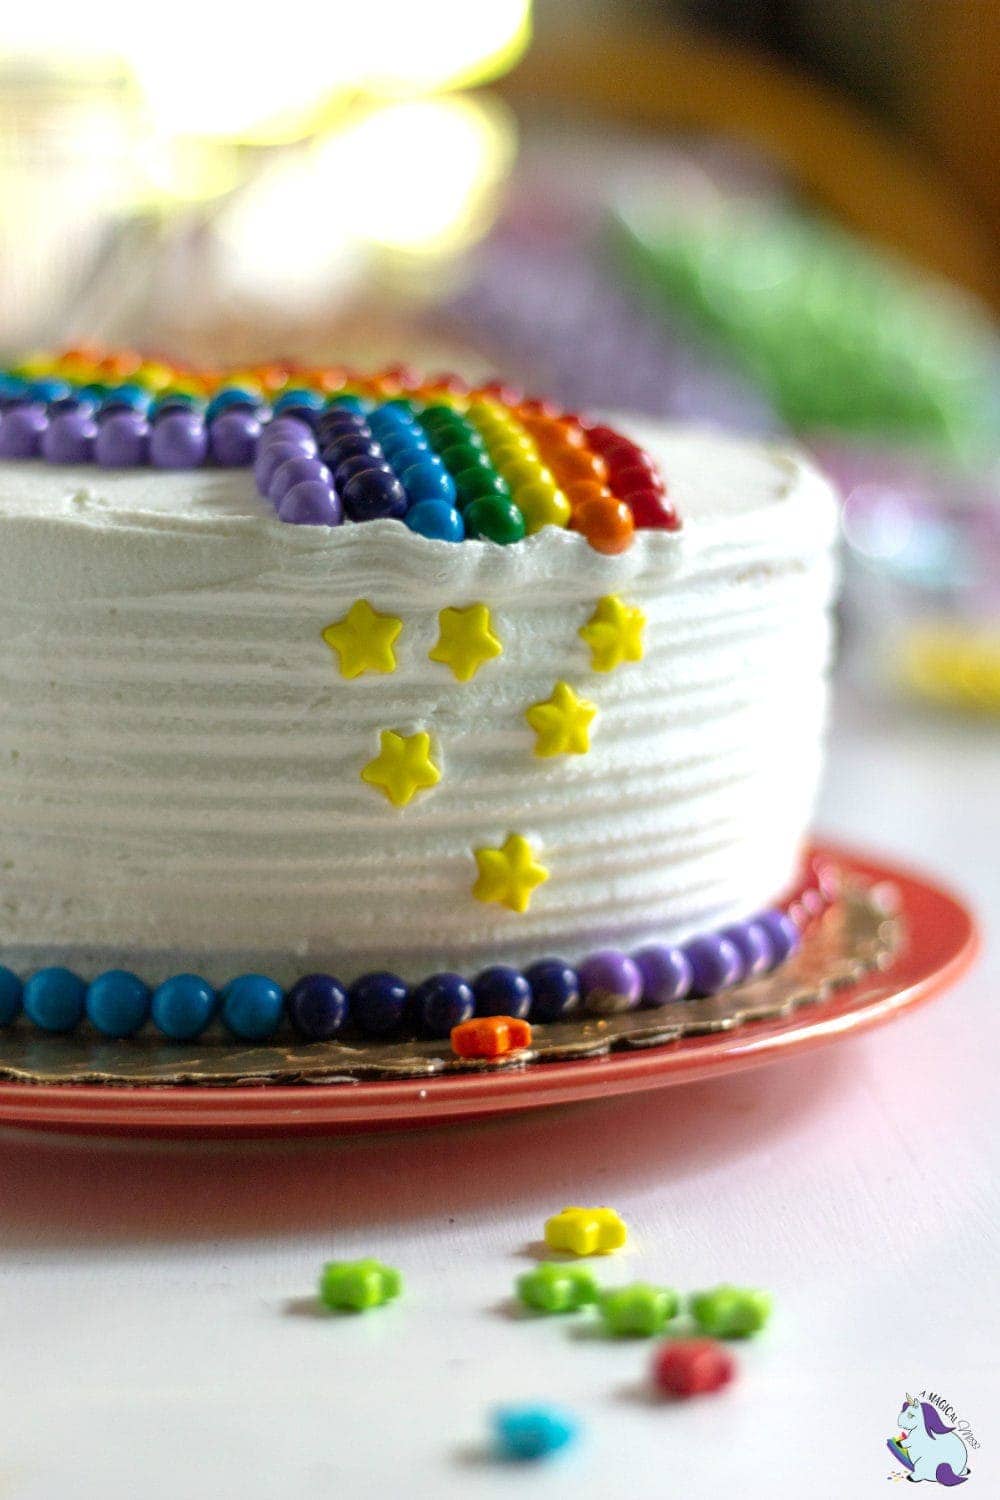 12 Easy Cake Decorating Ideas for Beginners - A Slice of Heaven-thanhphatduhoc.com.vn